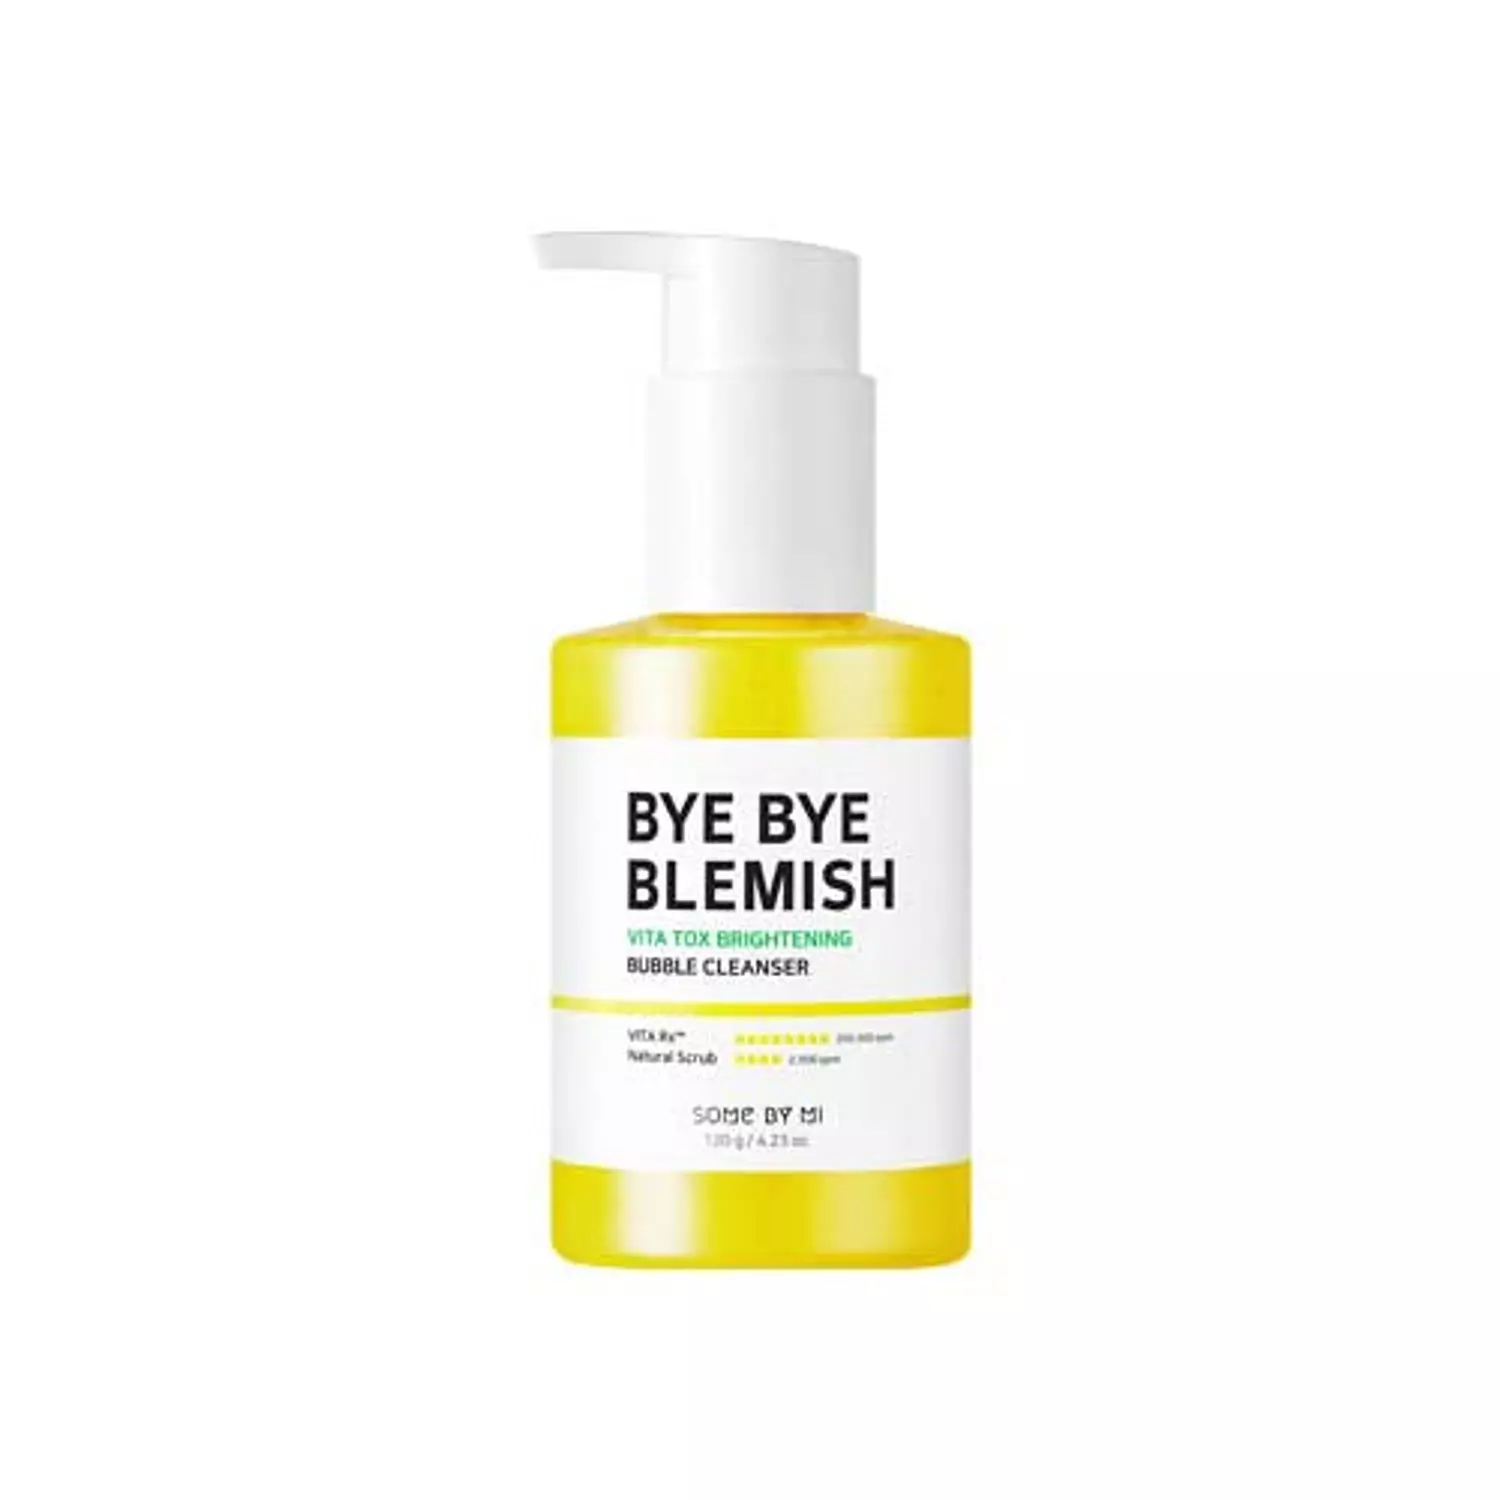 SOME BY MI - BYE BYE BLEMISH VITA TOX BRIGHTENING BUBBLE CLEANSER hover image